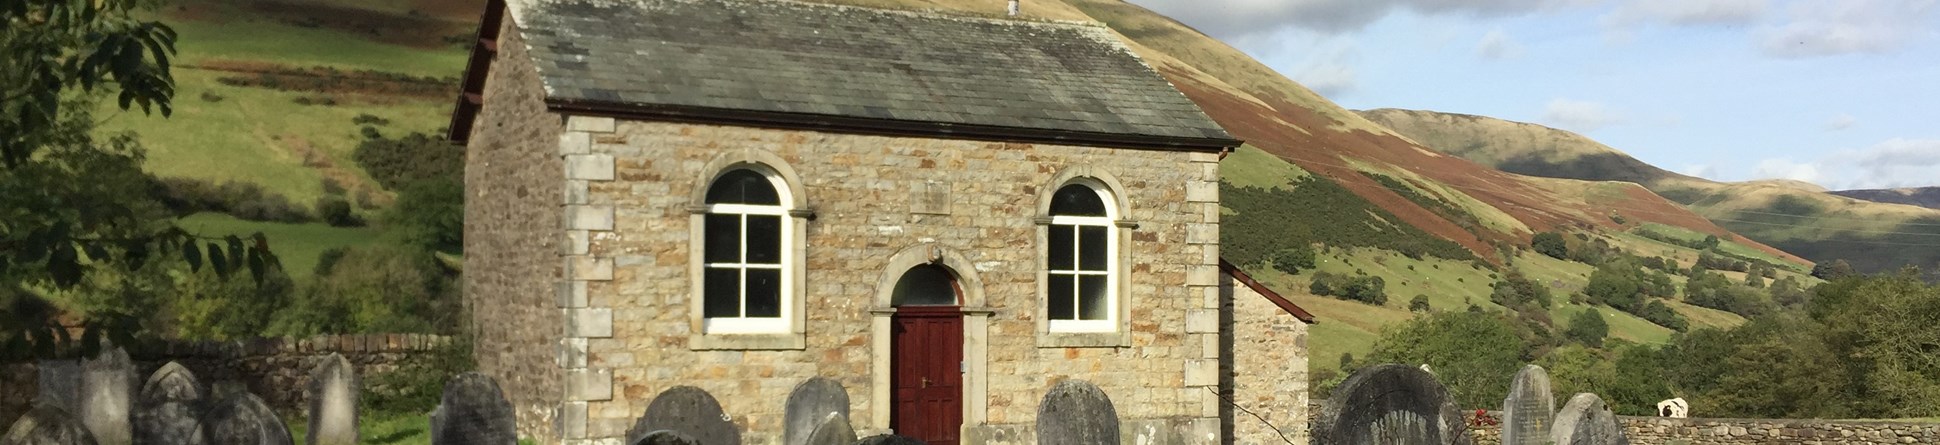 Small stone chapel set in Cumbrian mountain scenery on a sunny day.